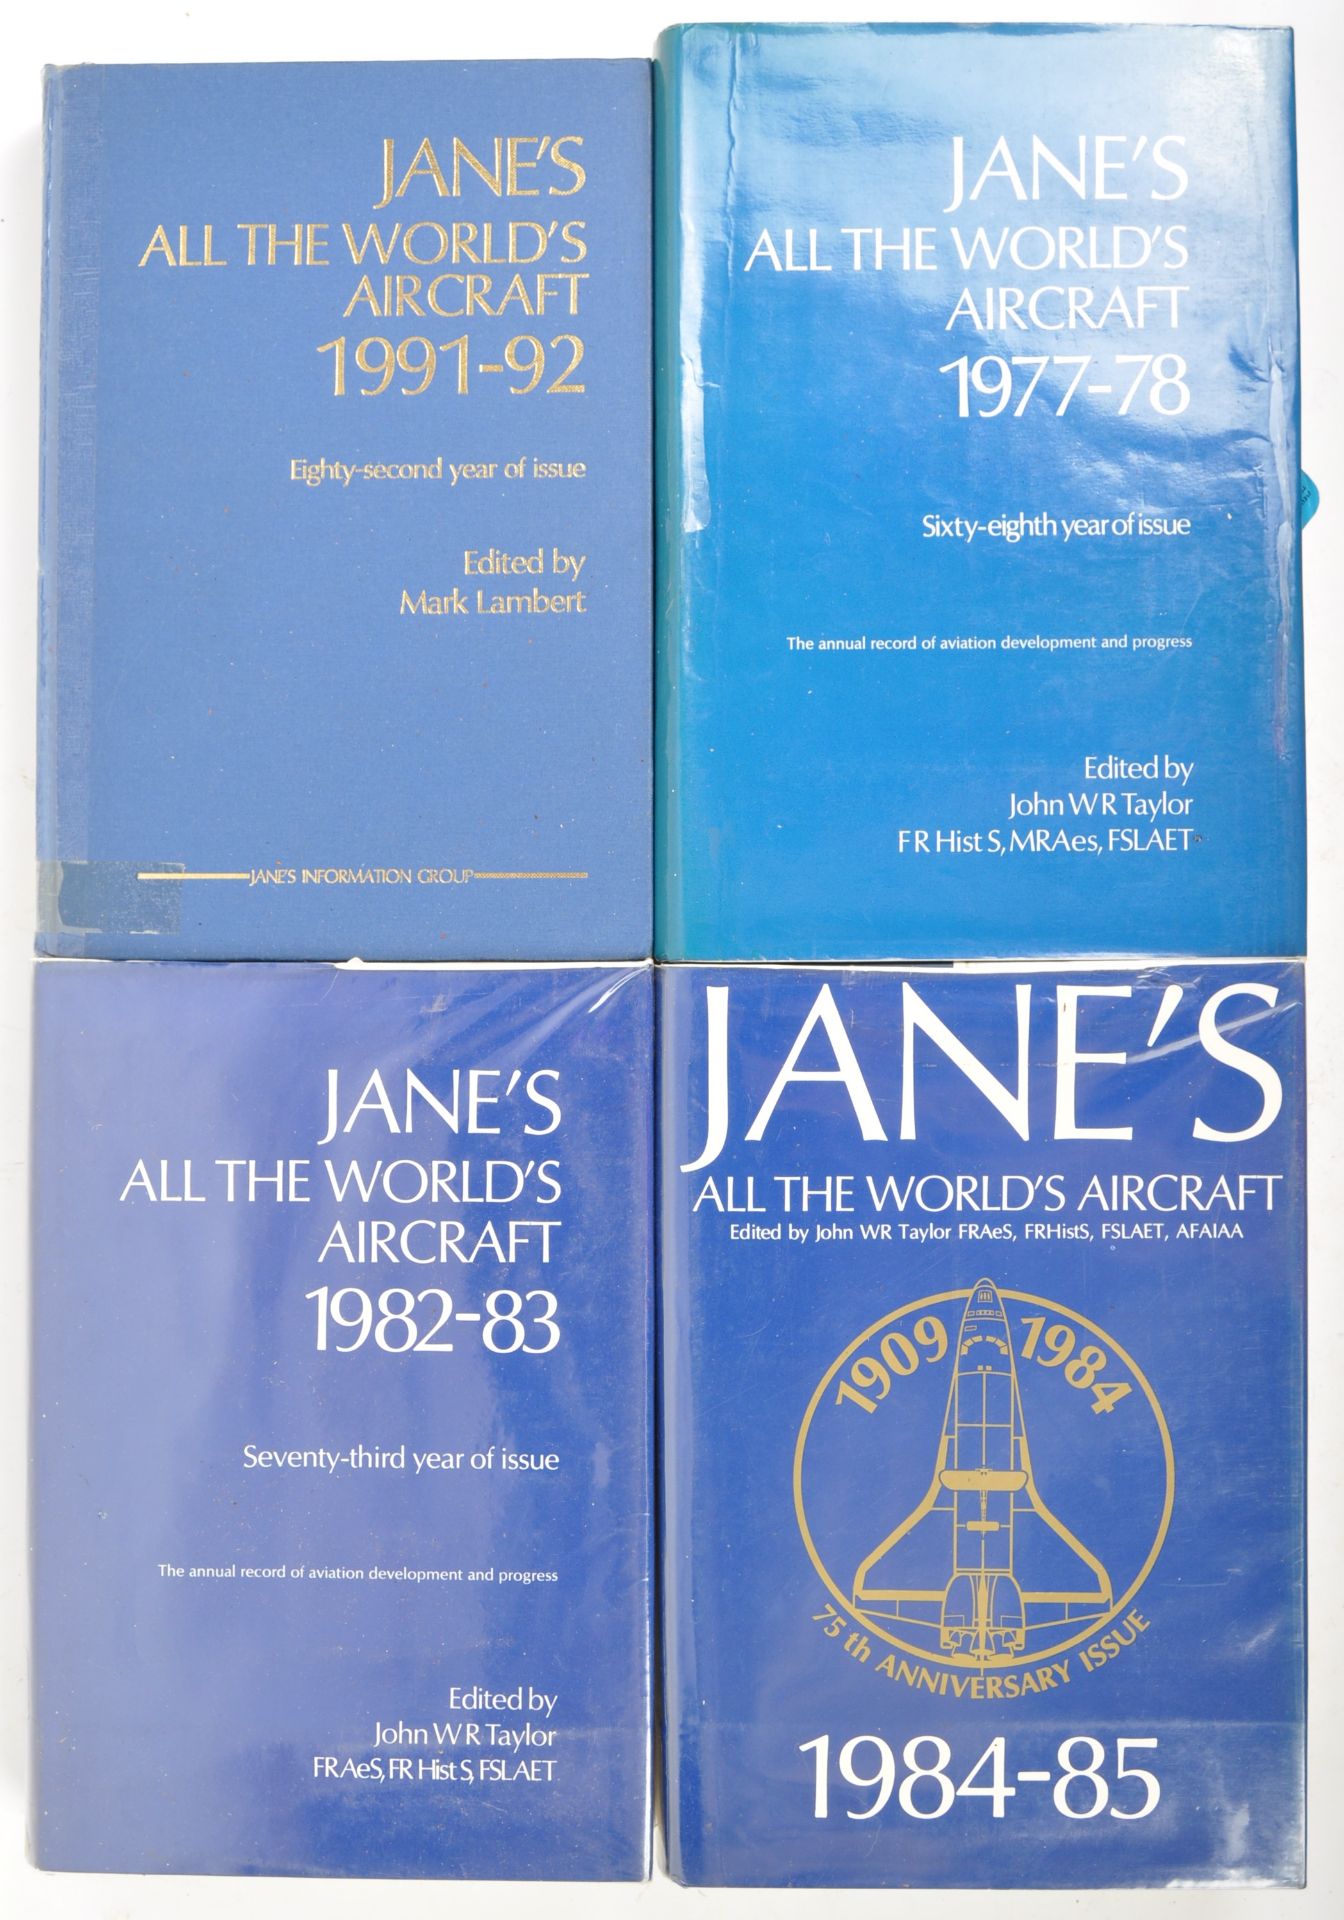 COLLECTION OF X4 JANES ALL THE WORLDS AIRCRAFTS BOOKS - Image 2 of 6